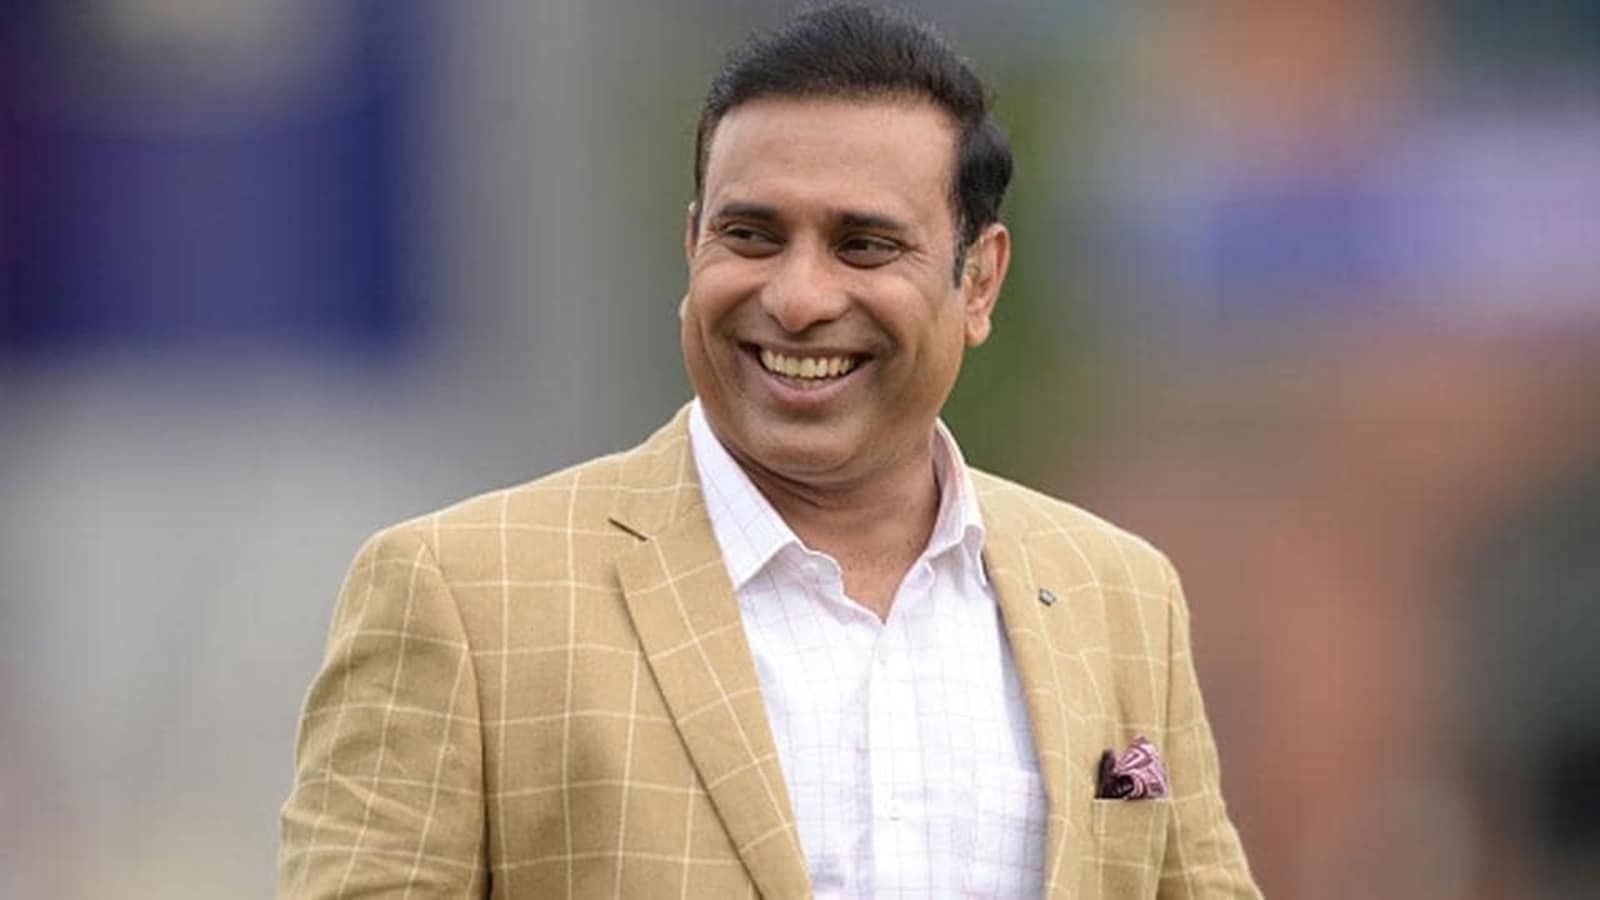 VVS Laxman thinks there is hardly anything that differentiates the T20 World Cup finalists